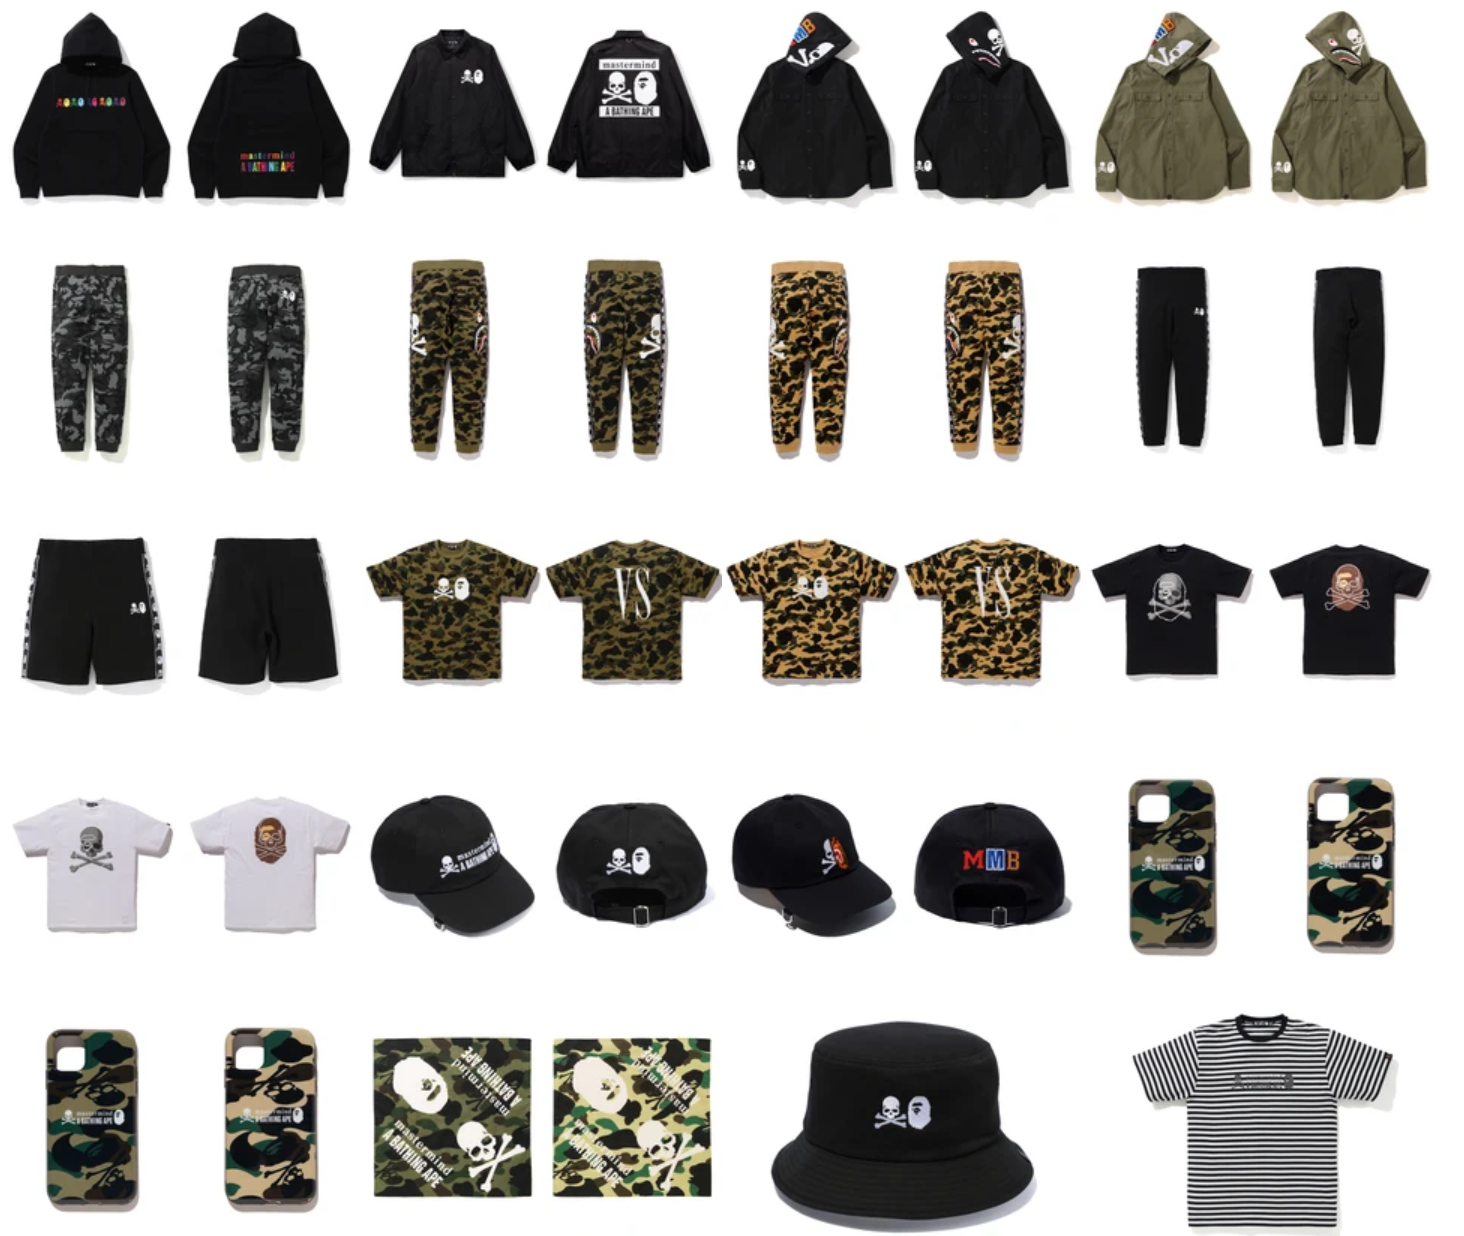 mastermind vs A BATHING APE Opens Pop-Up Shop in Tokyo